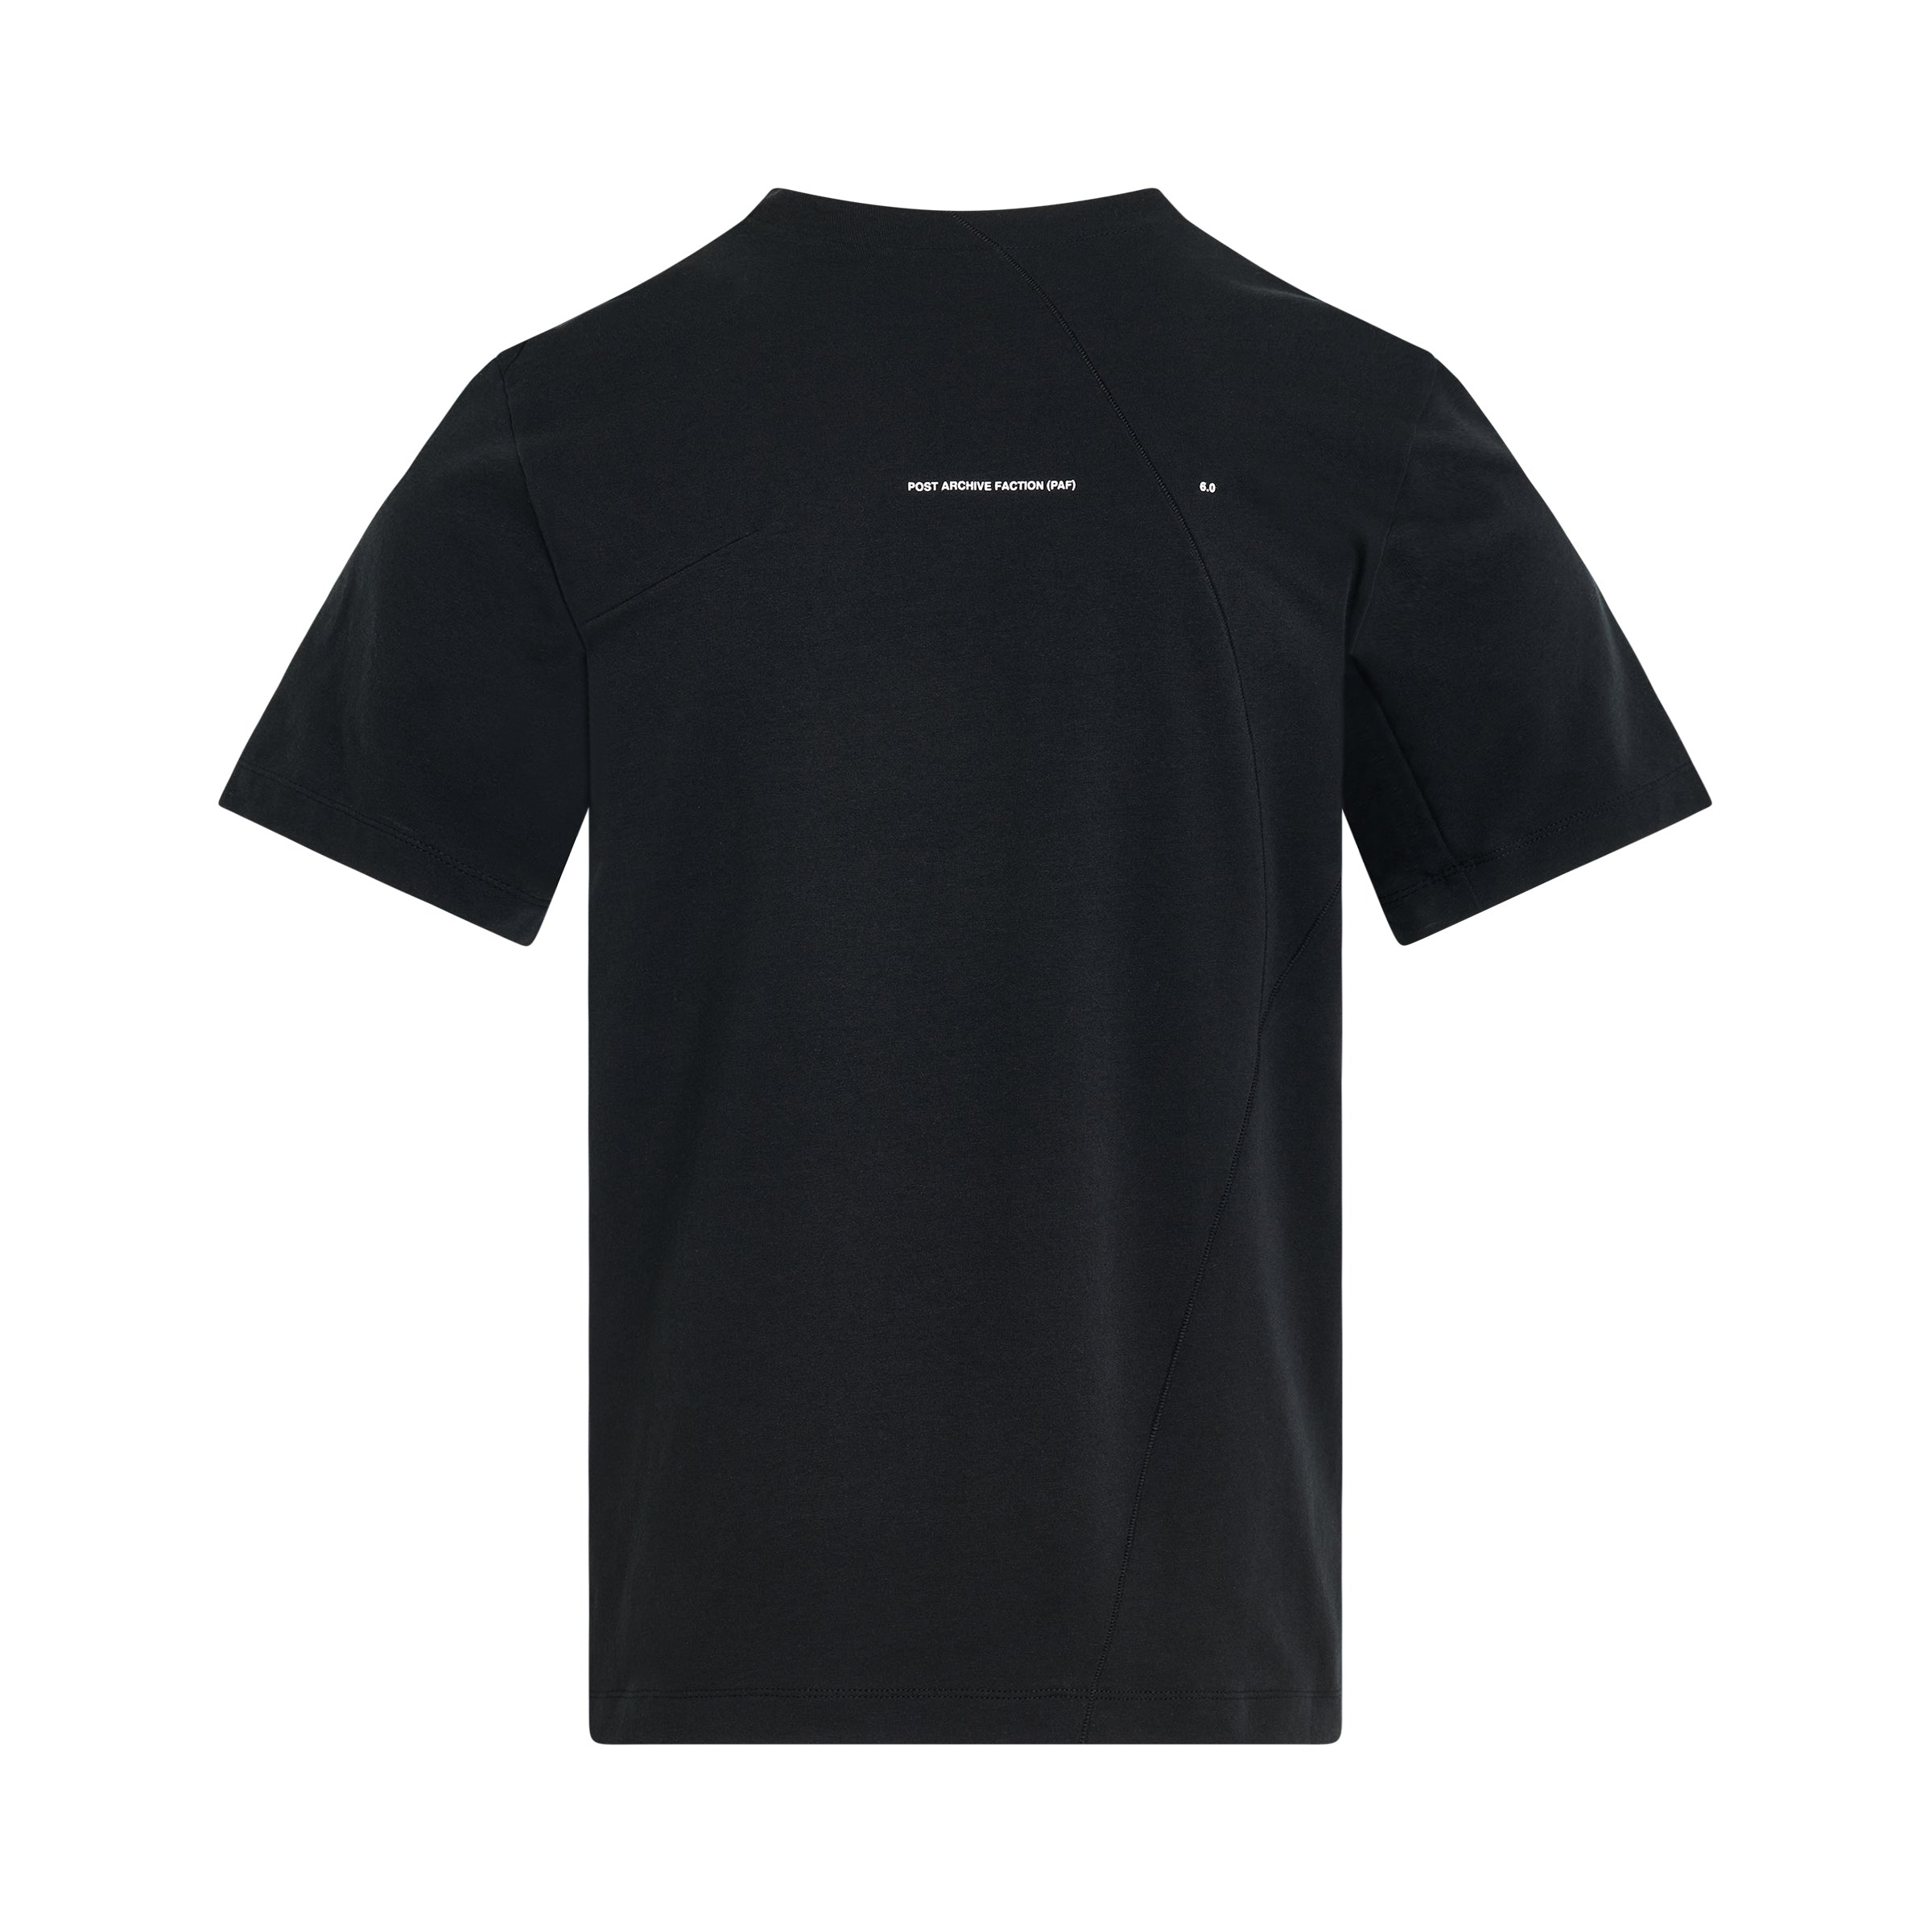 6.0 T-Shirt (Right) in Black - 4